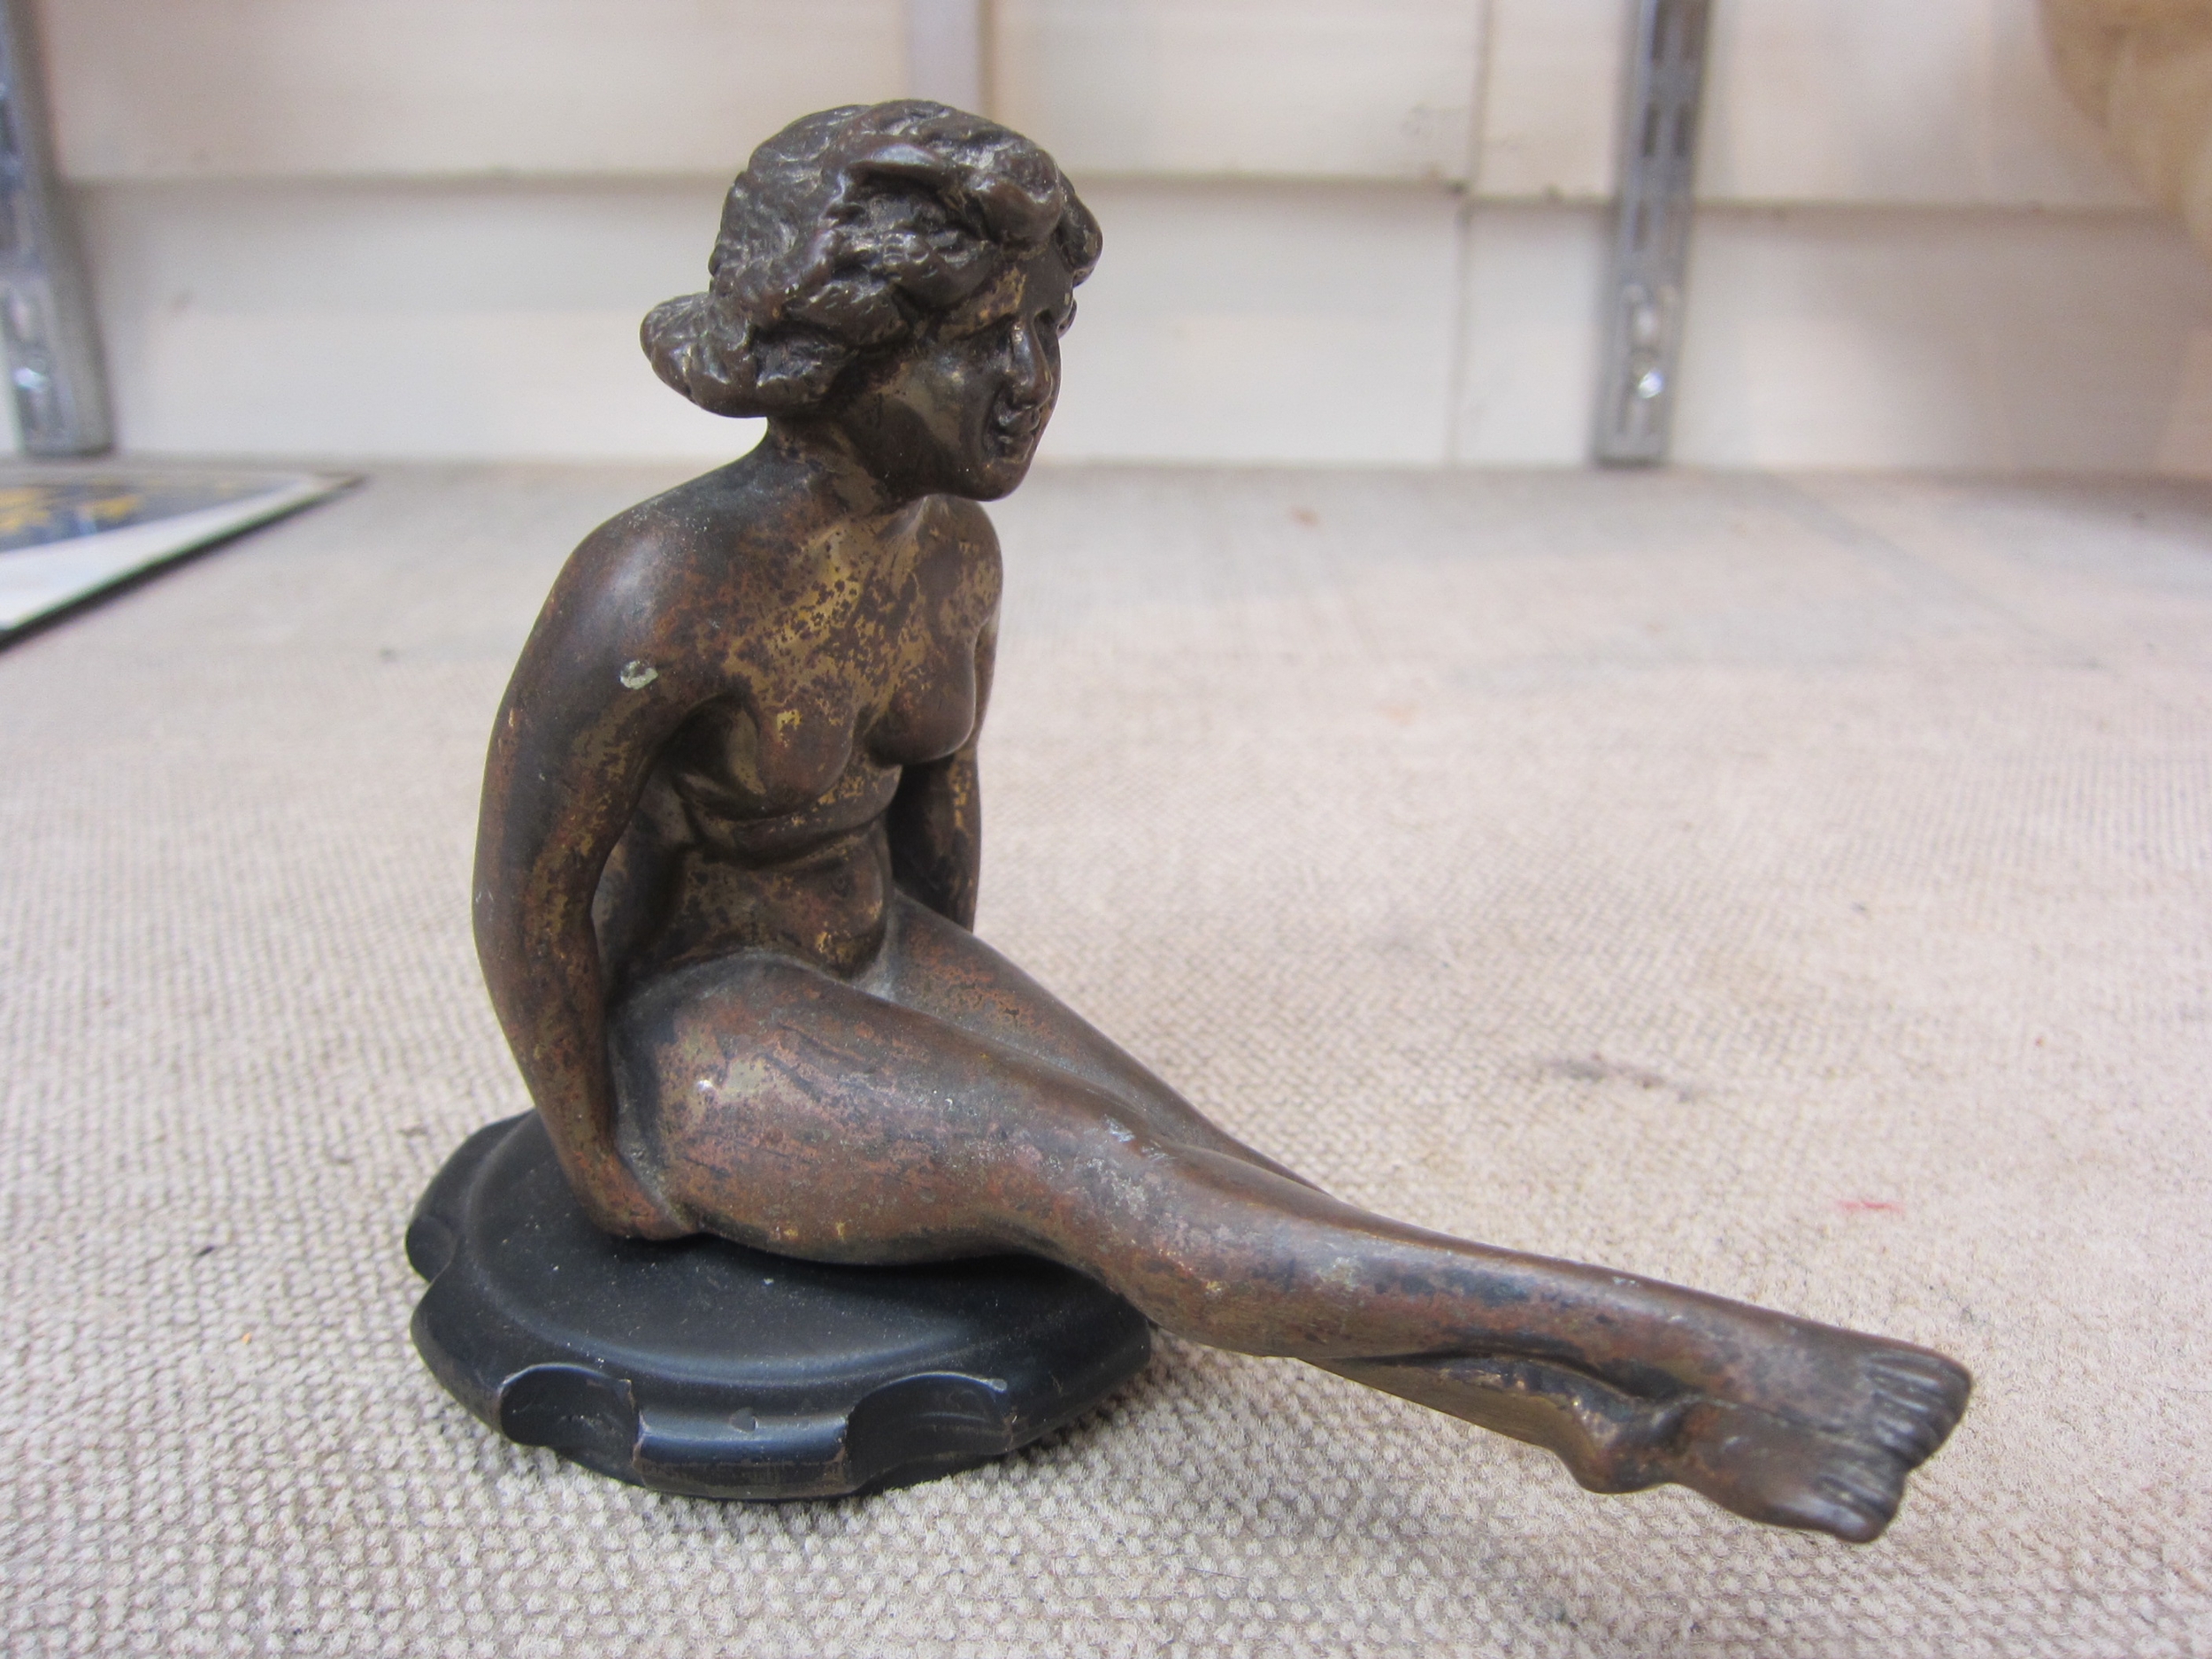 A bronze car radiator mascot circa 1900-1930, in the form of a seated naked lady